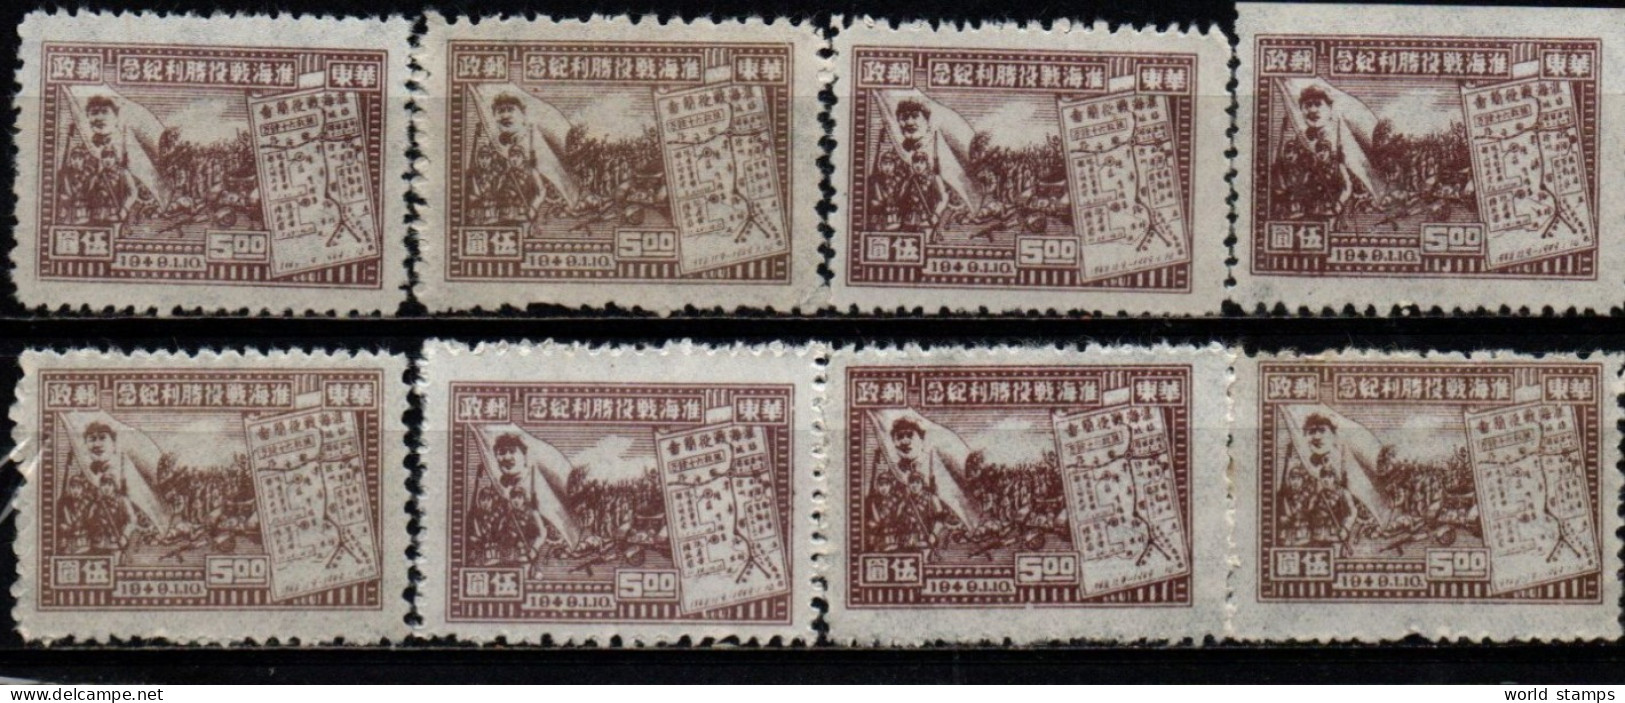 CHINE ORIENTALE 1949 SANS GOMME - Oost-China 1949-50